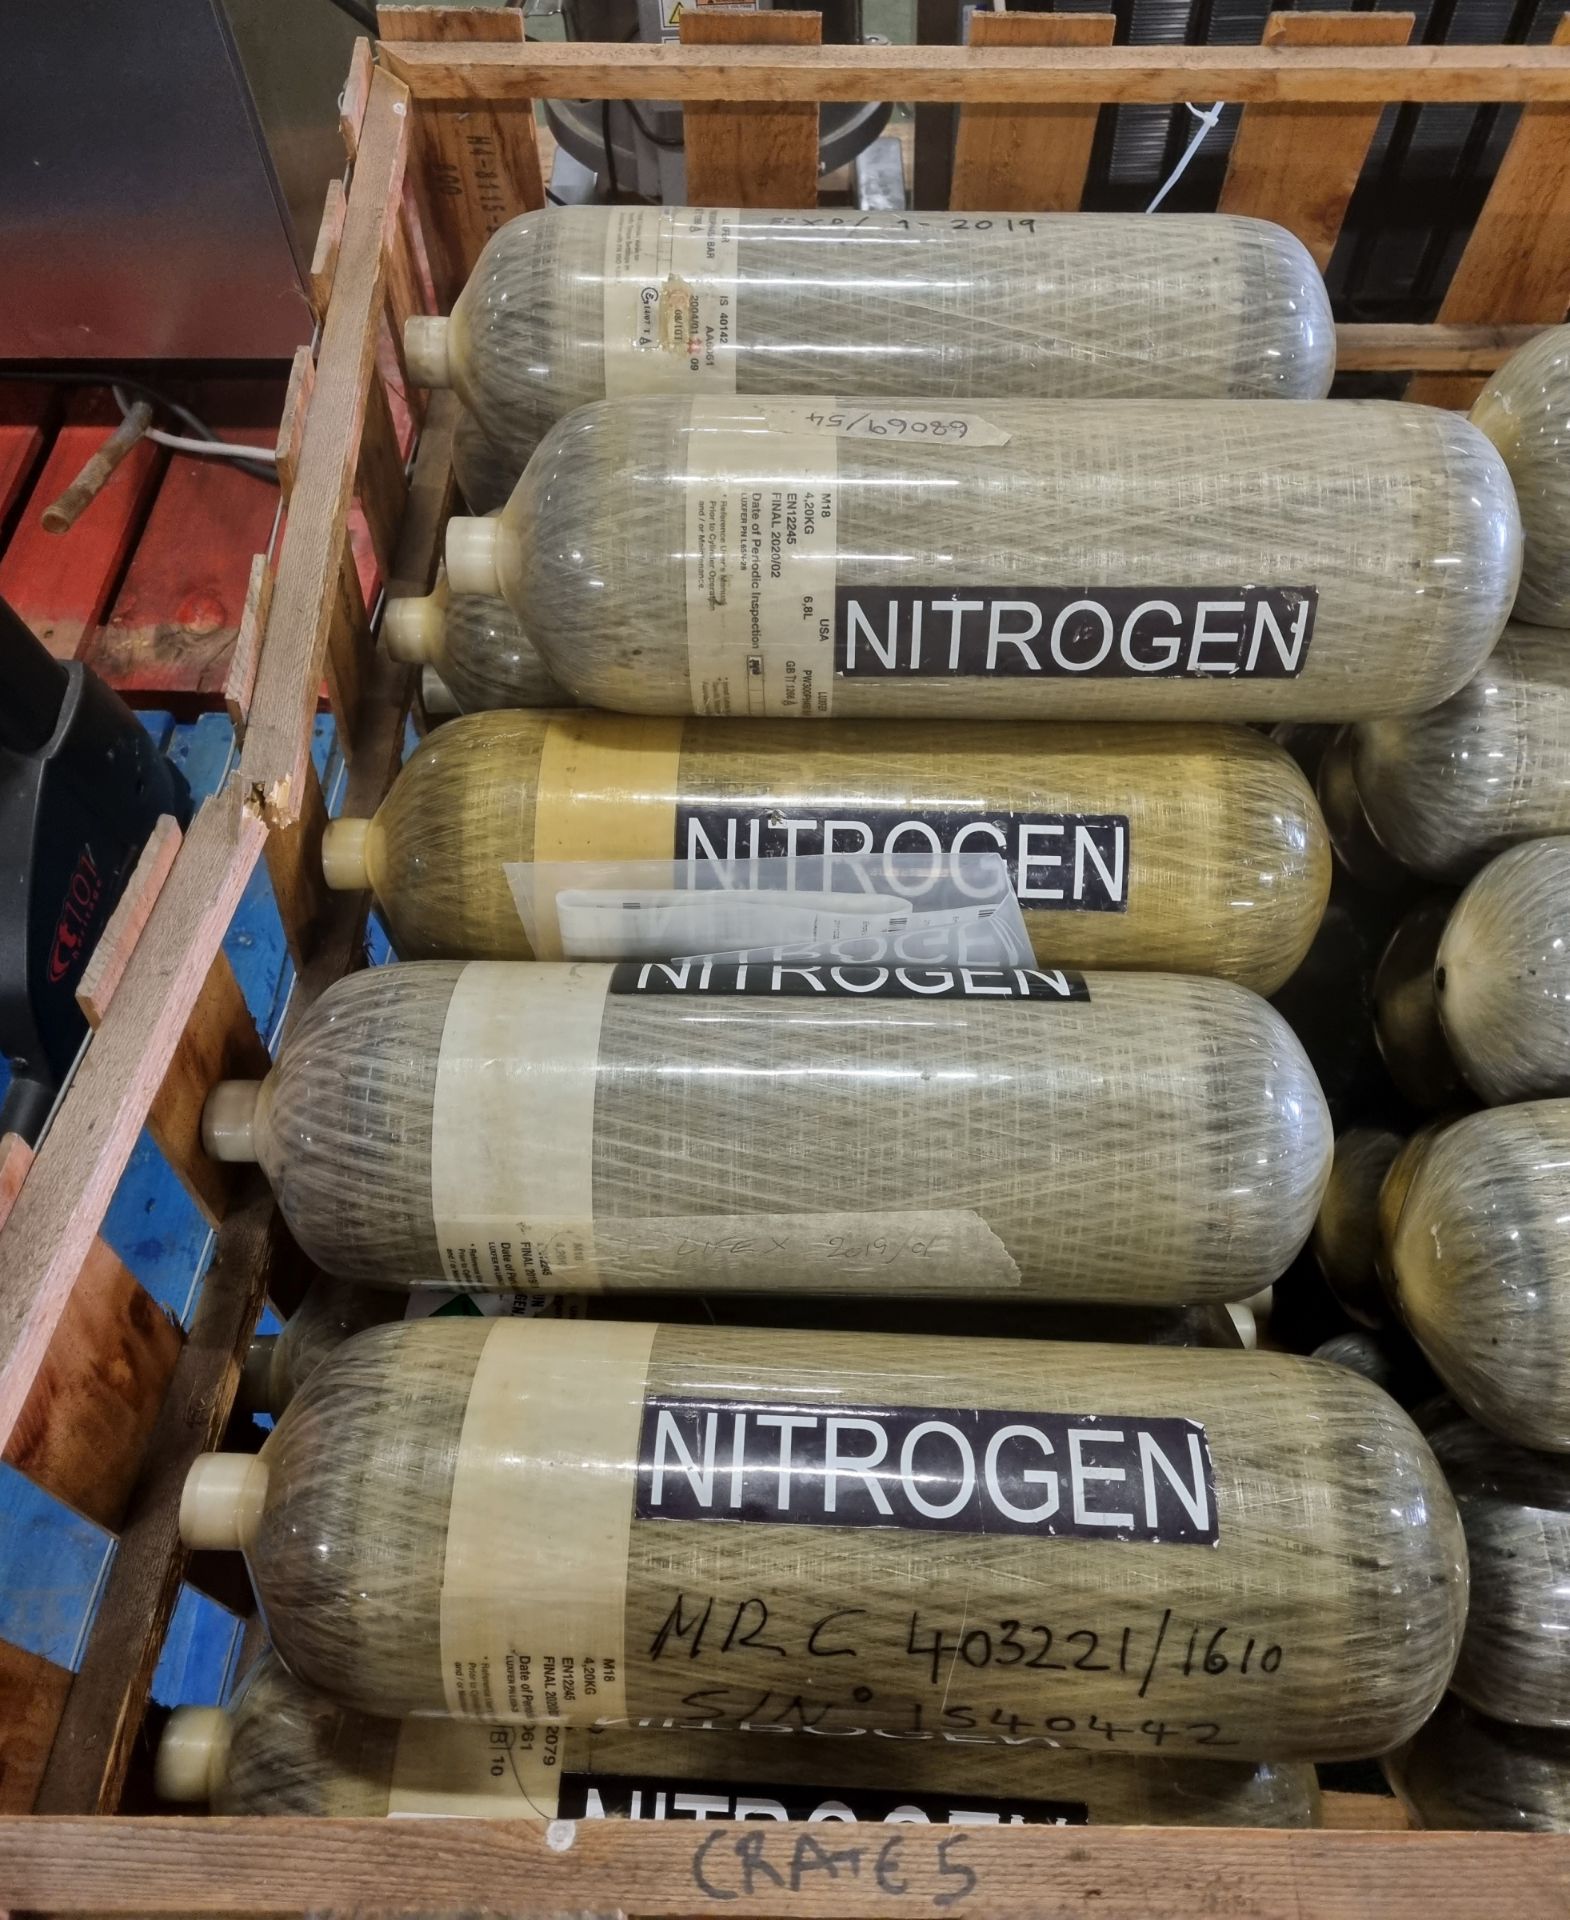 21x Luxfer 6.8ltr Oxygen Canisters - empty, 24x Luxfer 6.8ltr Nitrogen Canisters - empty - Image 3 of 5